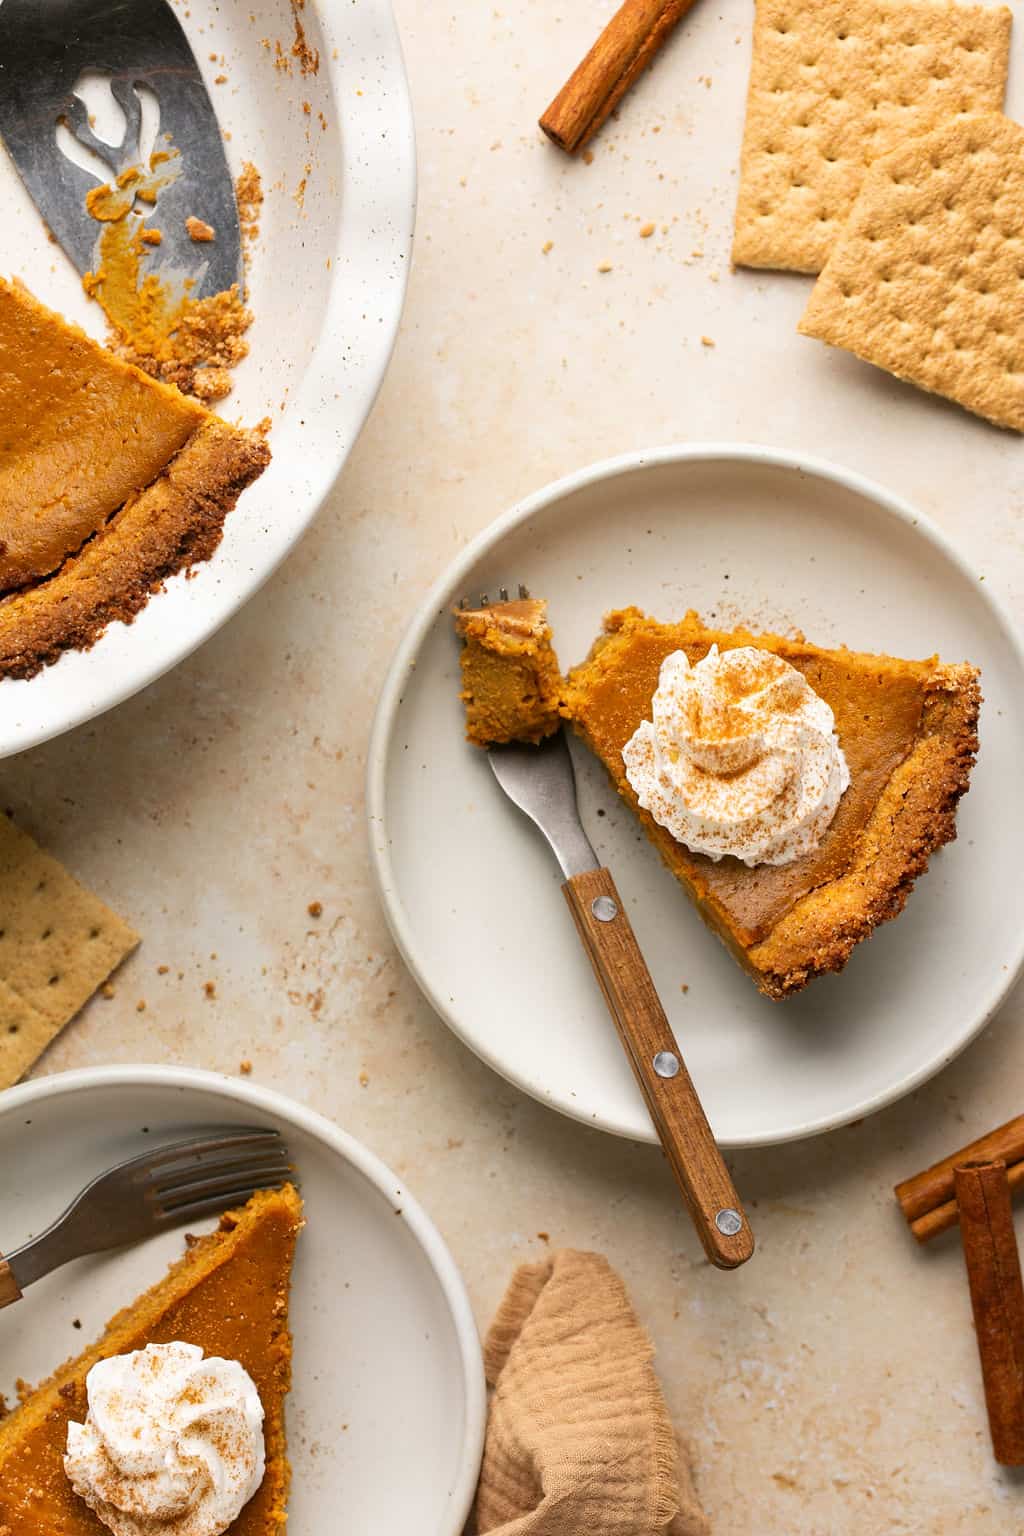 Two plated slices of pumpkin pie with whipped cream and cinnamon on top and one with a bite taken out of it.